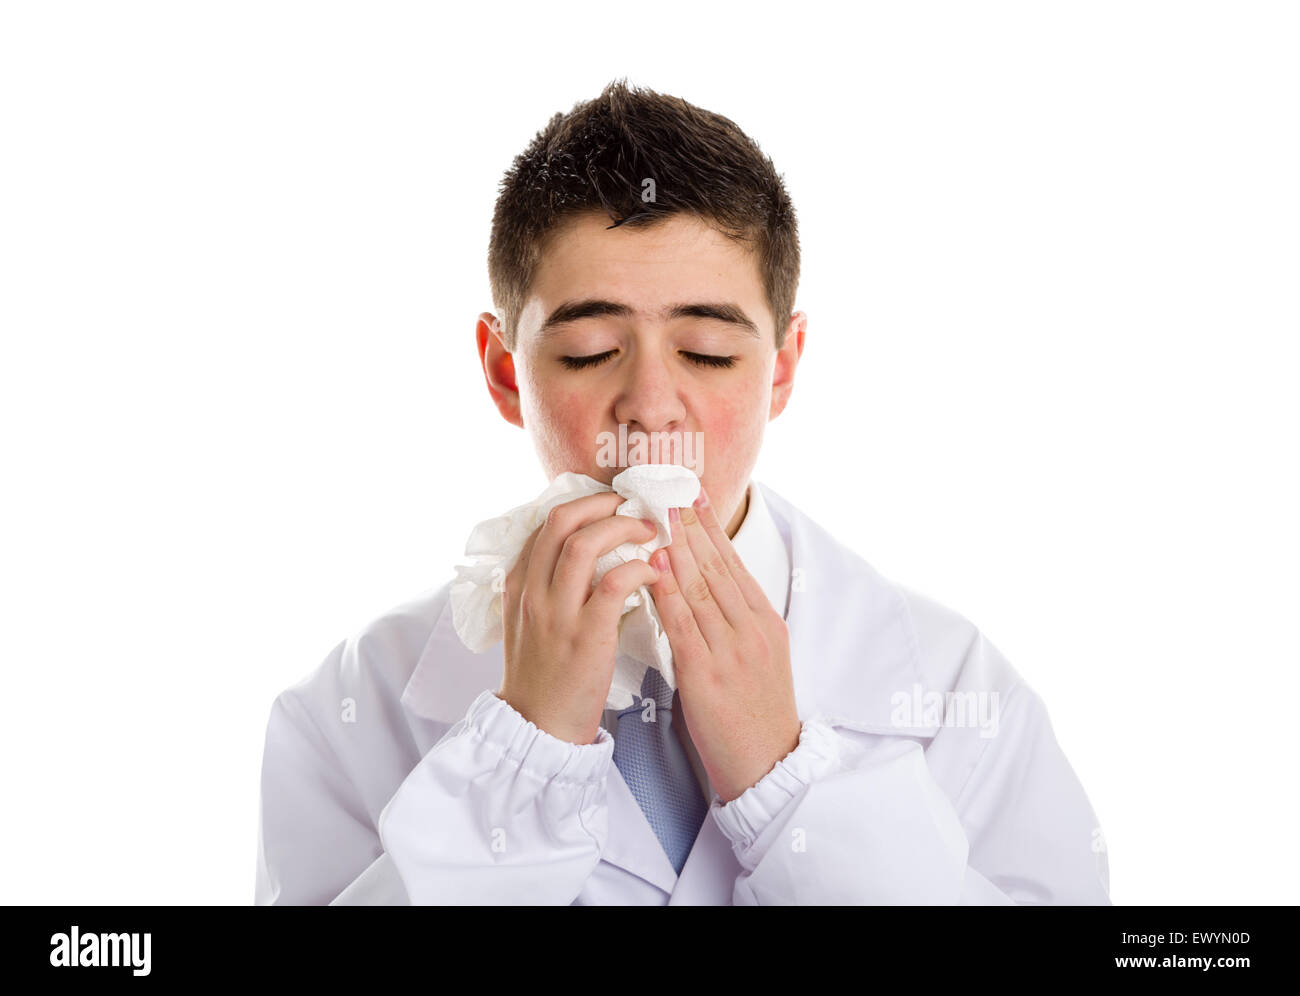 A boy doctor in white coat and blue tie helps to feel medicine more friendly: he is cleaning his lips with handkerchief.. His acne skin has not ben retouched Stock Photo